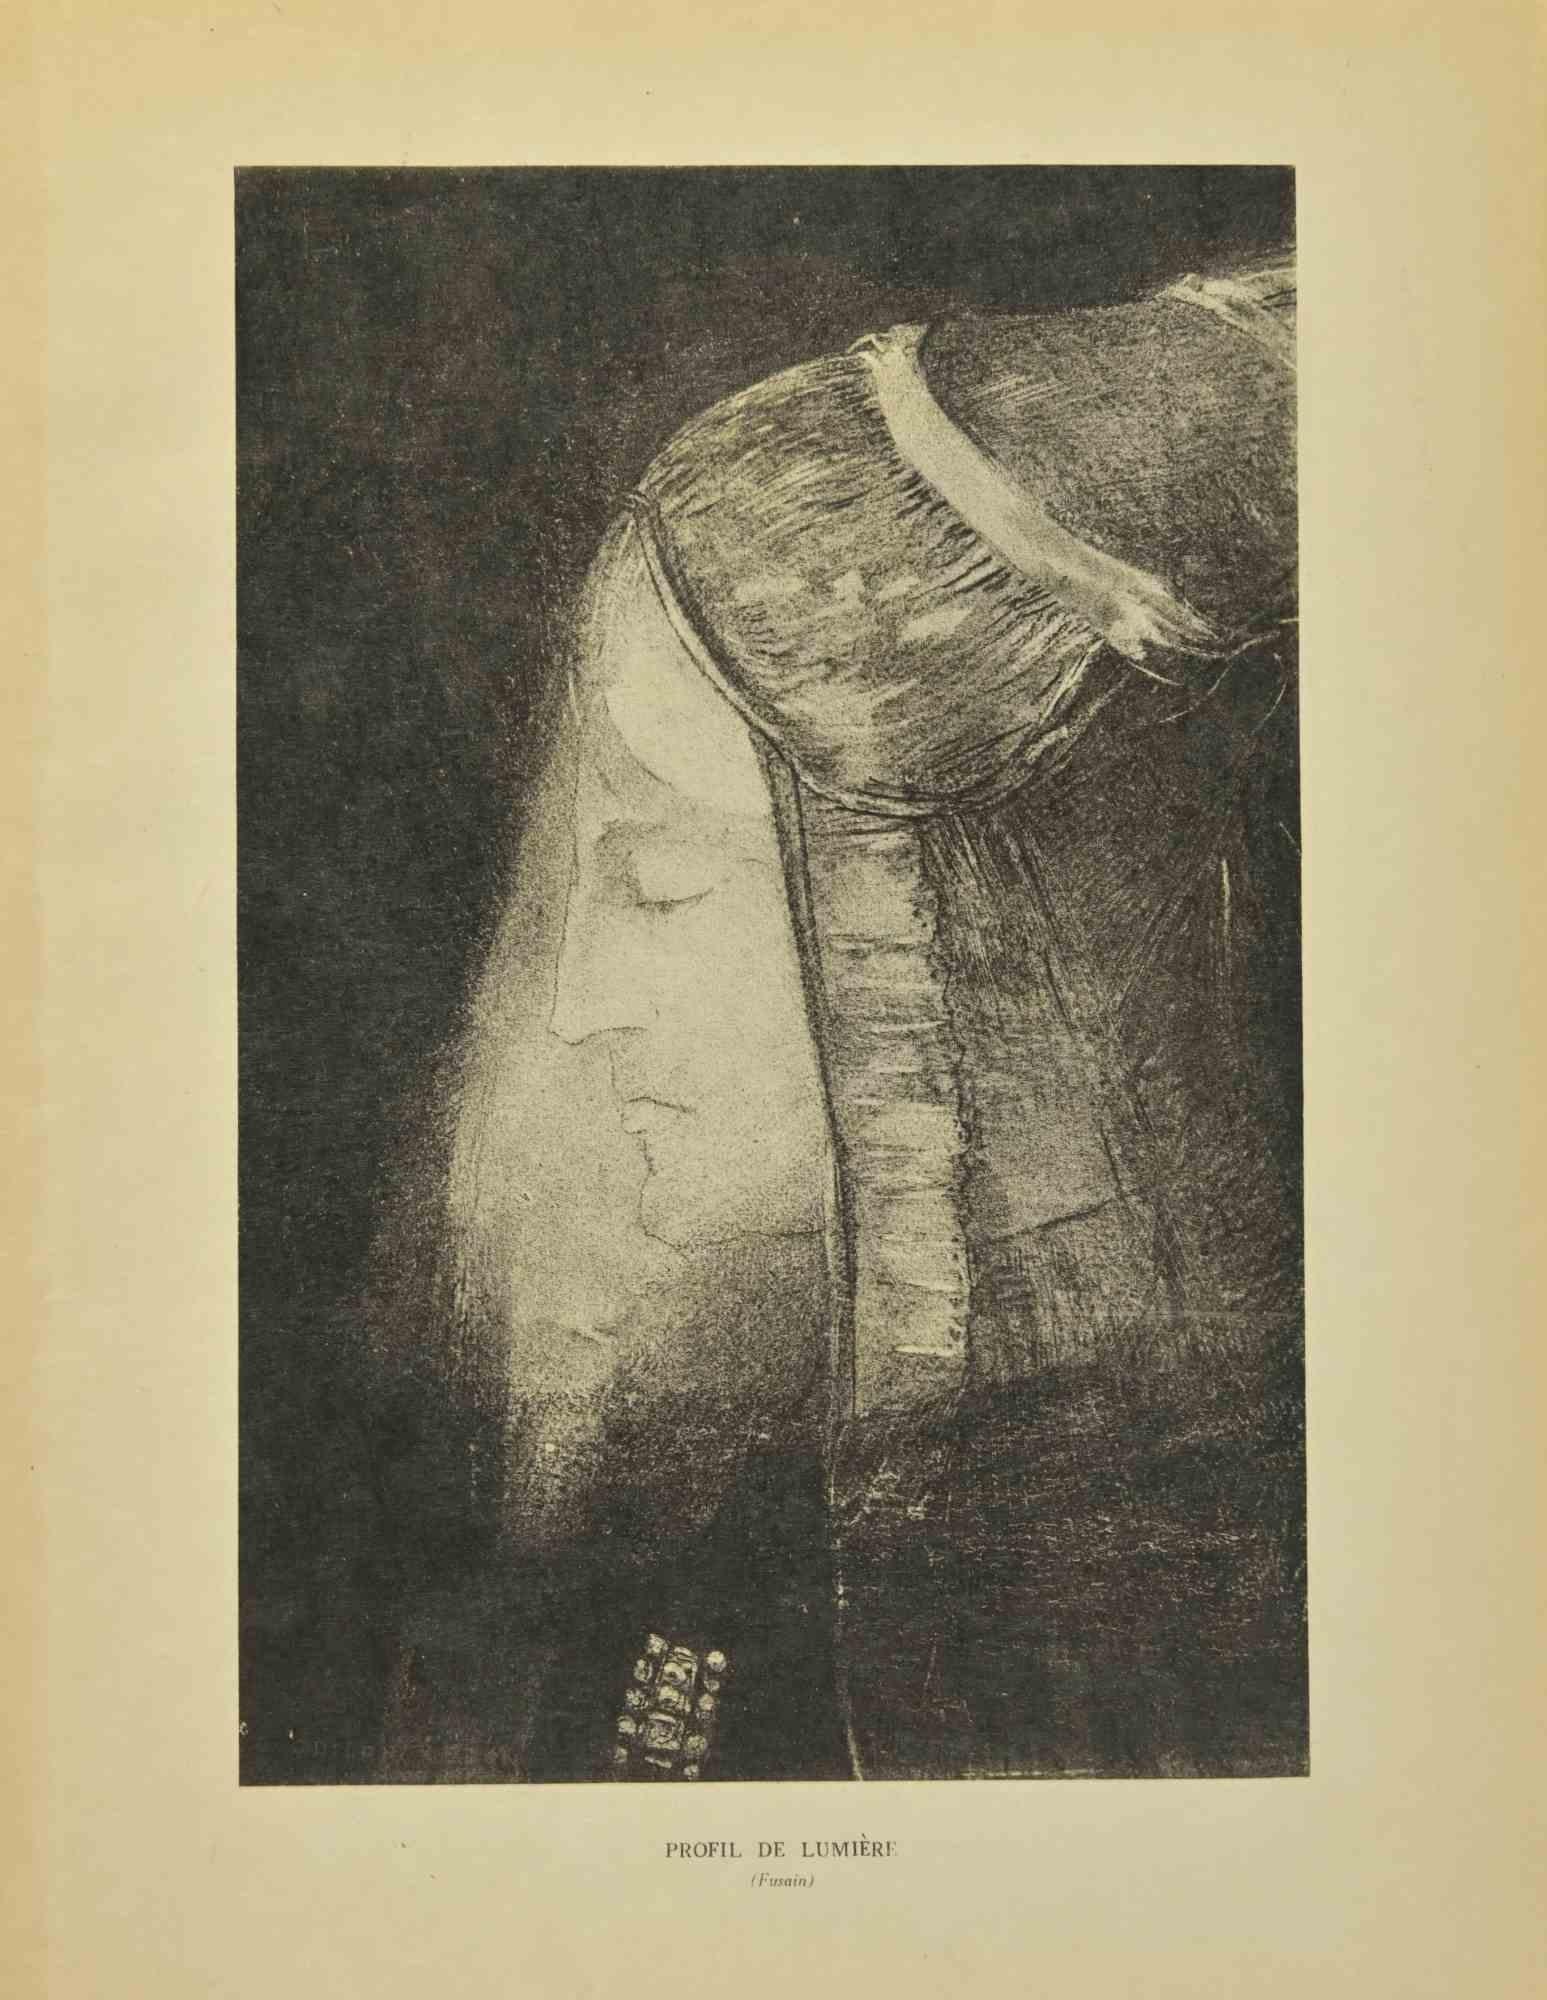 Profil de Lumière is a phototype reproduction realized after Odilon Redon. 

They belong to the suite "Odilon Redon Peintre, Dessinateur et Graveur", published by Henri Felury in 1923.

Titled on the lower.

Good conditions, foxing on